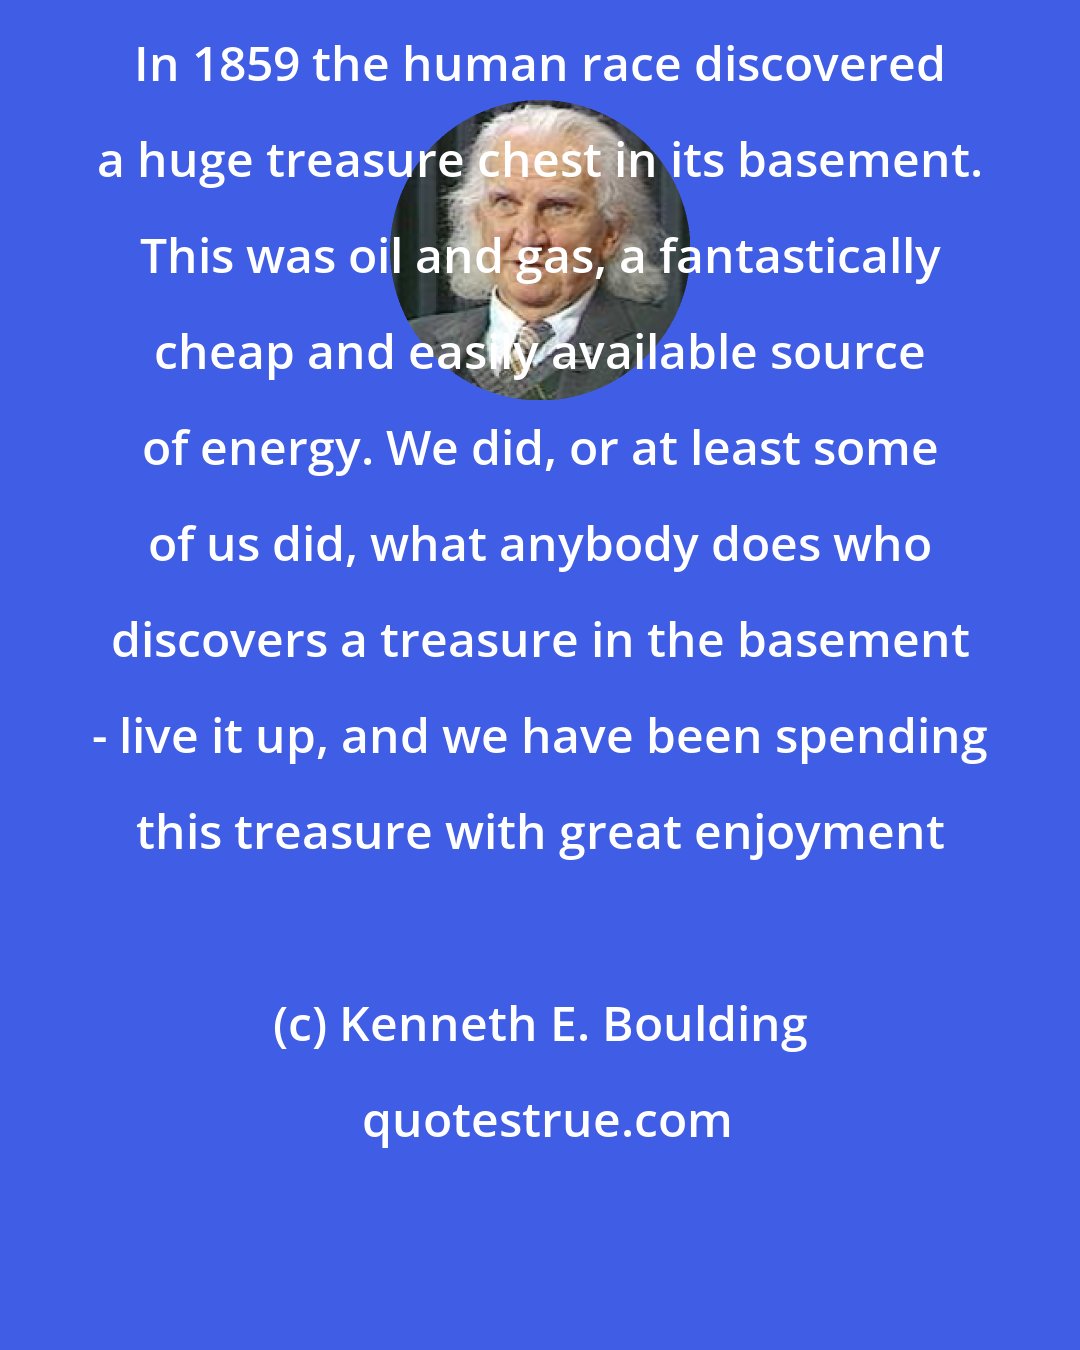 Kenneth E. Boulding: In 1859 the human race discovered a huge treasure chest in its basement. This was oil and gas, a fantastically cheap and easily available source of energy. We did, or at least some of us did, what anybody does who discovers a treasure in the basement - live it up, and we have been spending this treasure with great enjoyment